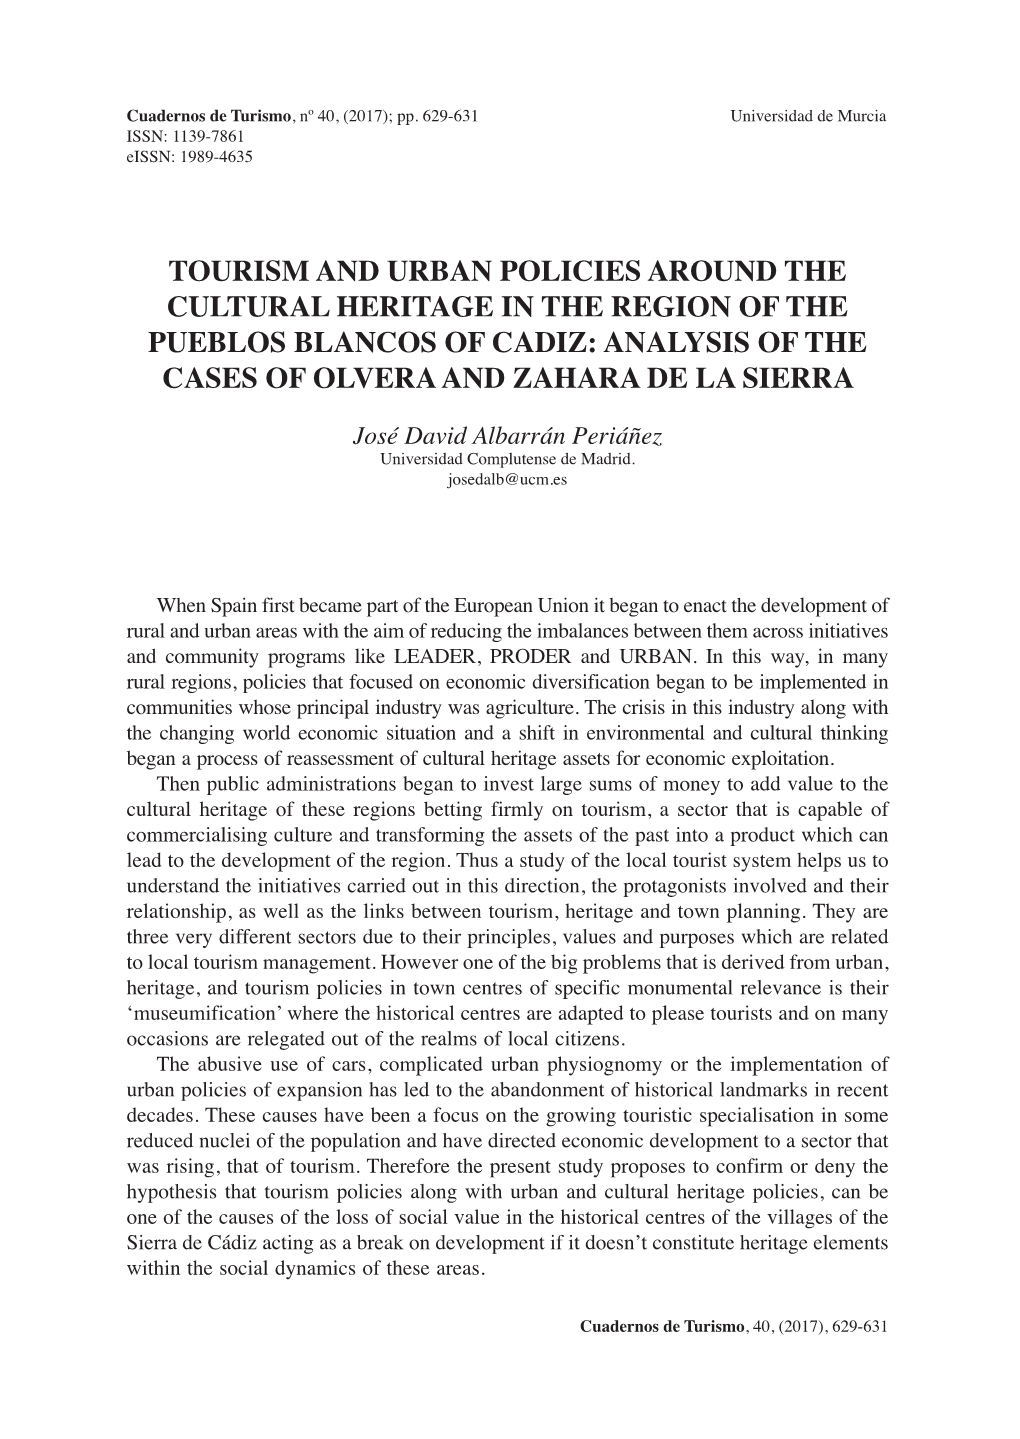 Tourism and Urban Policies Around the Cultural Heritage in the Region of the Pueblos Blancos of Cadiz: Analysis of the Cases of Olvera and Zahara De La Sierra